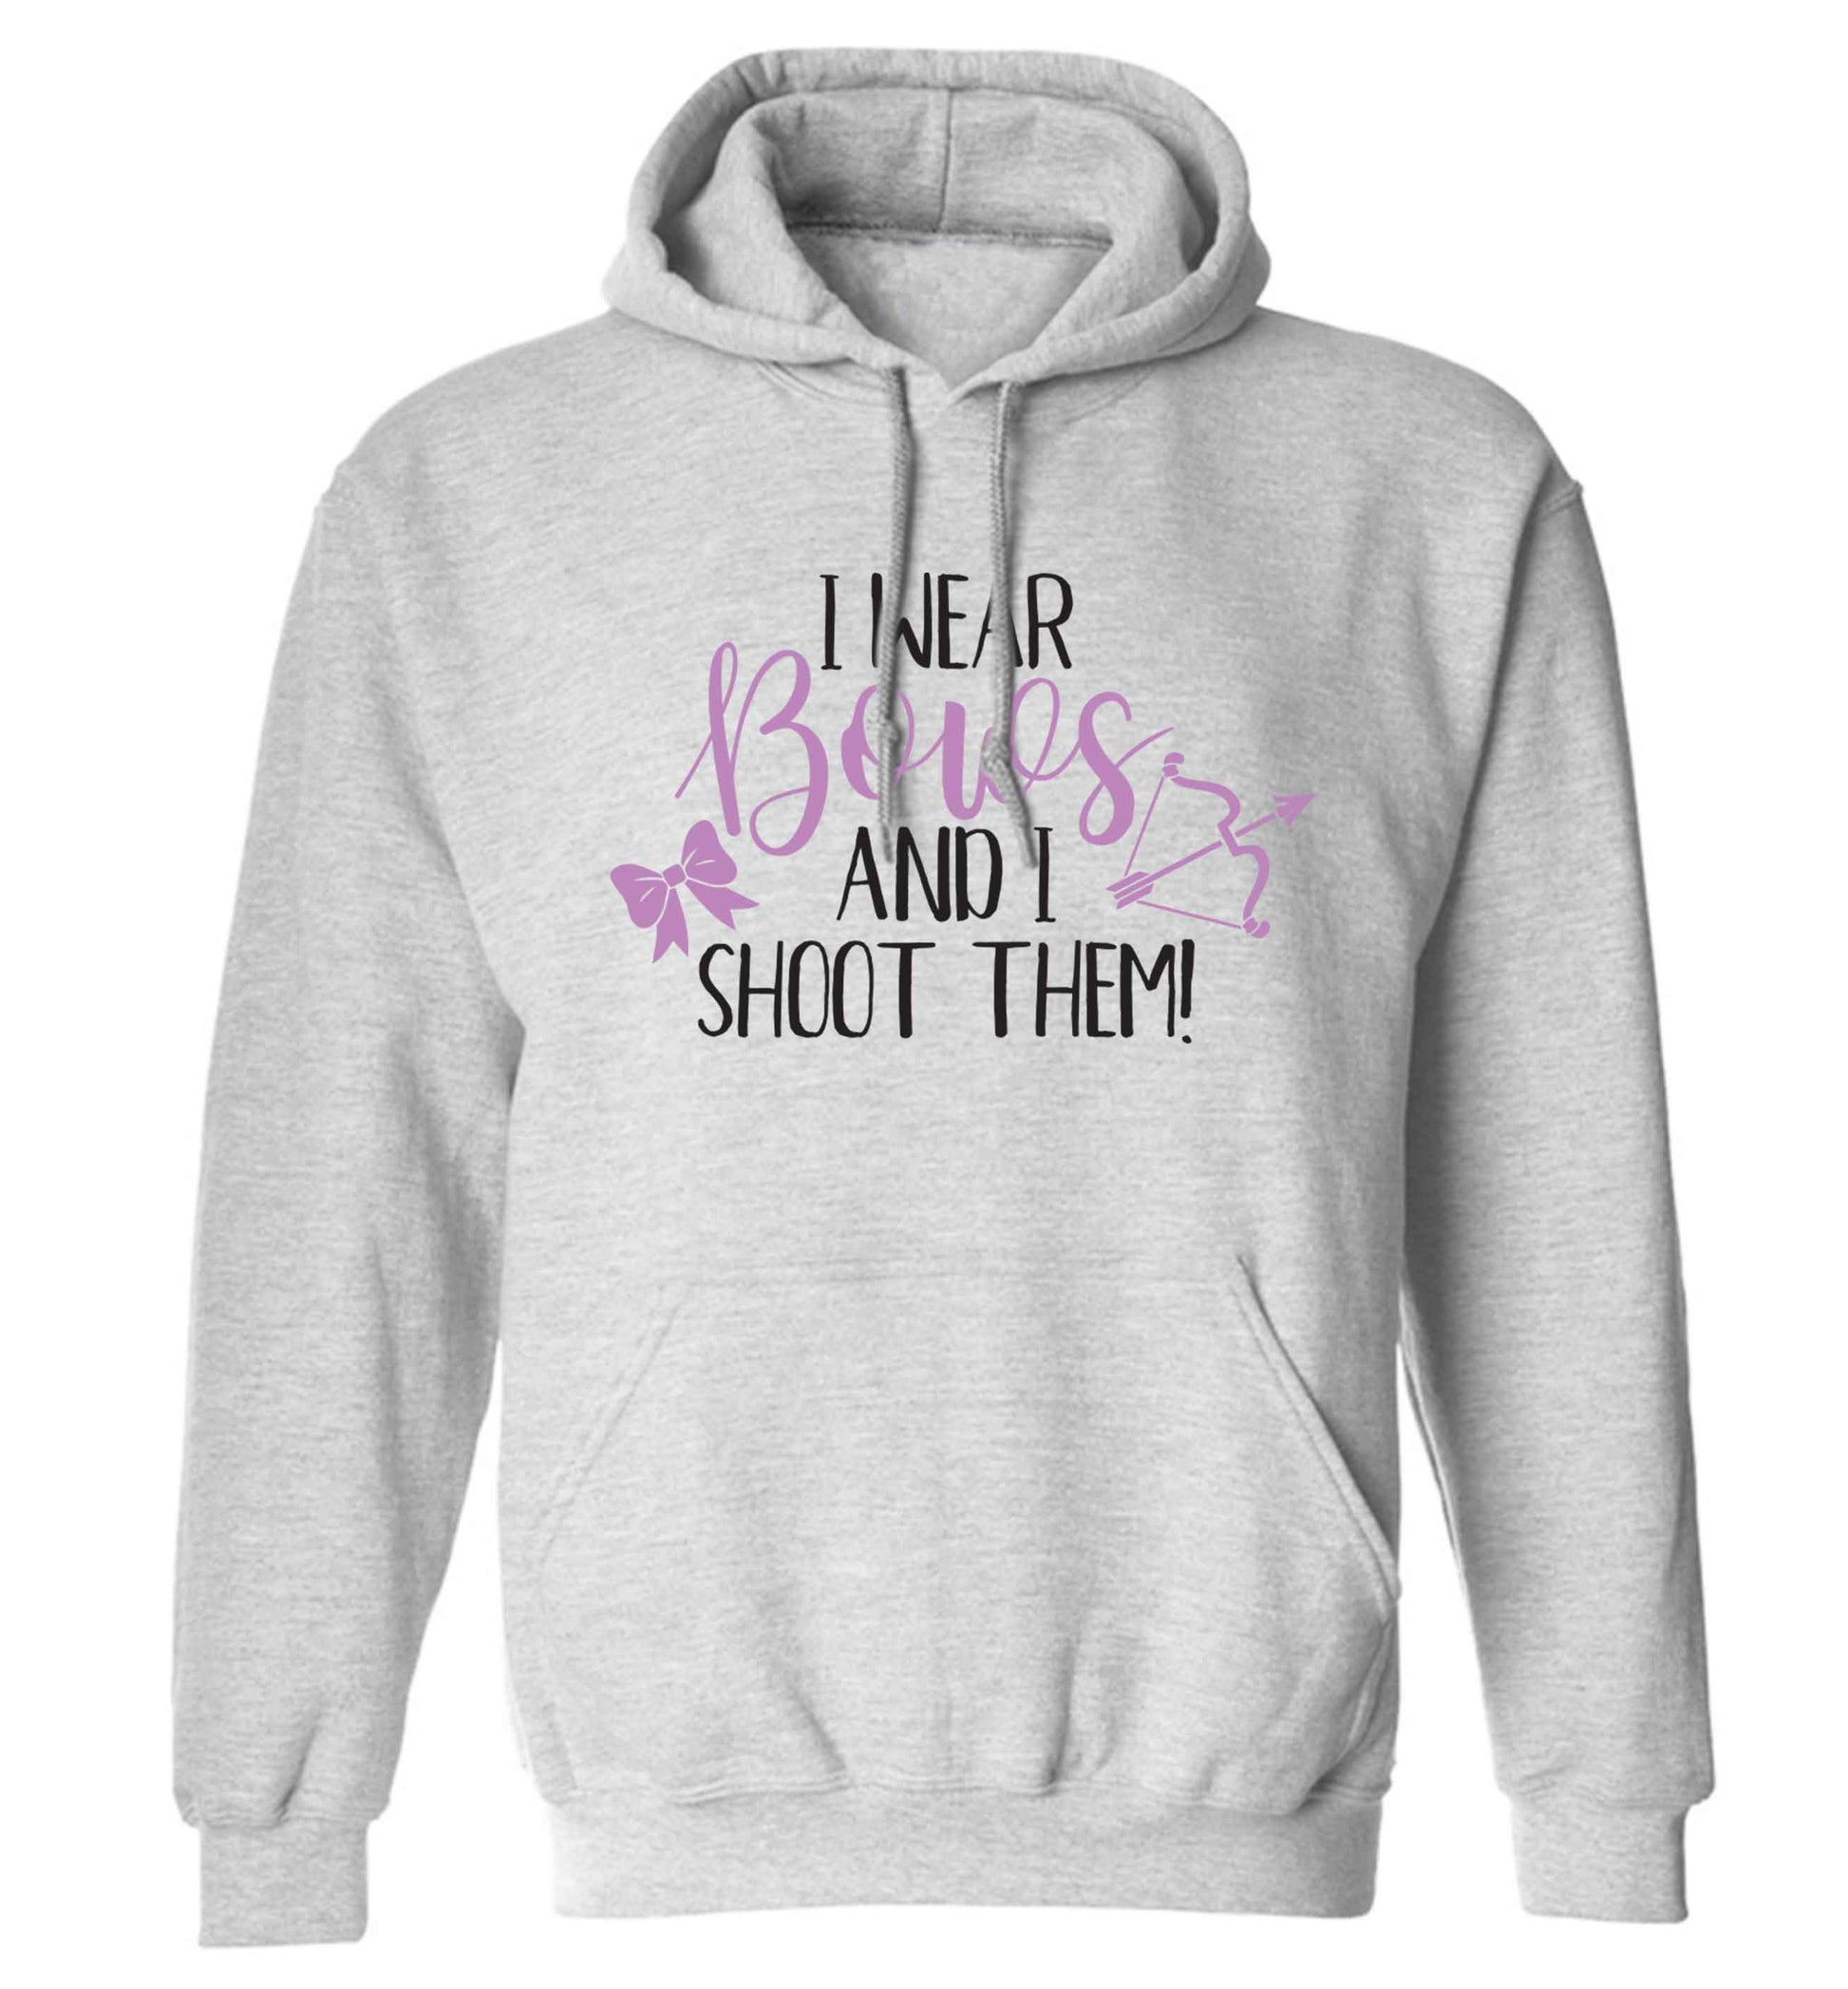 I wear bows and I shoot them adults unisex grey hoodie 2XL